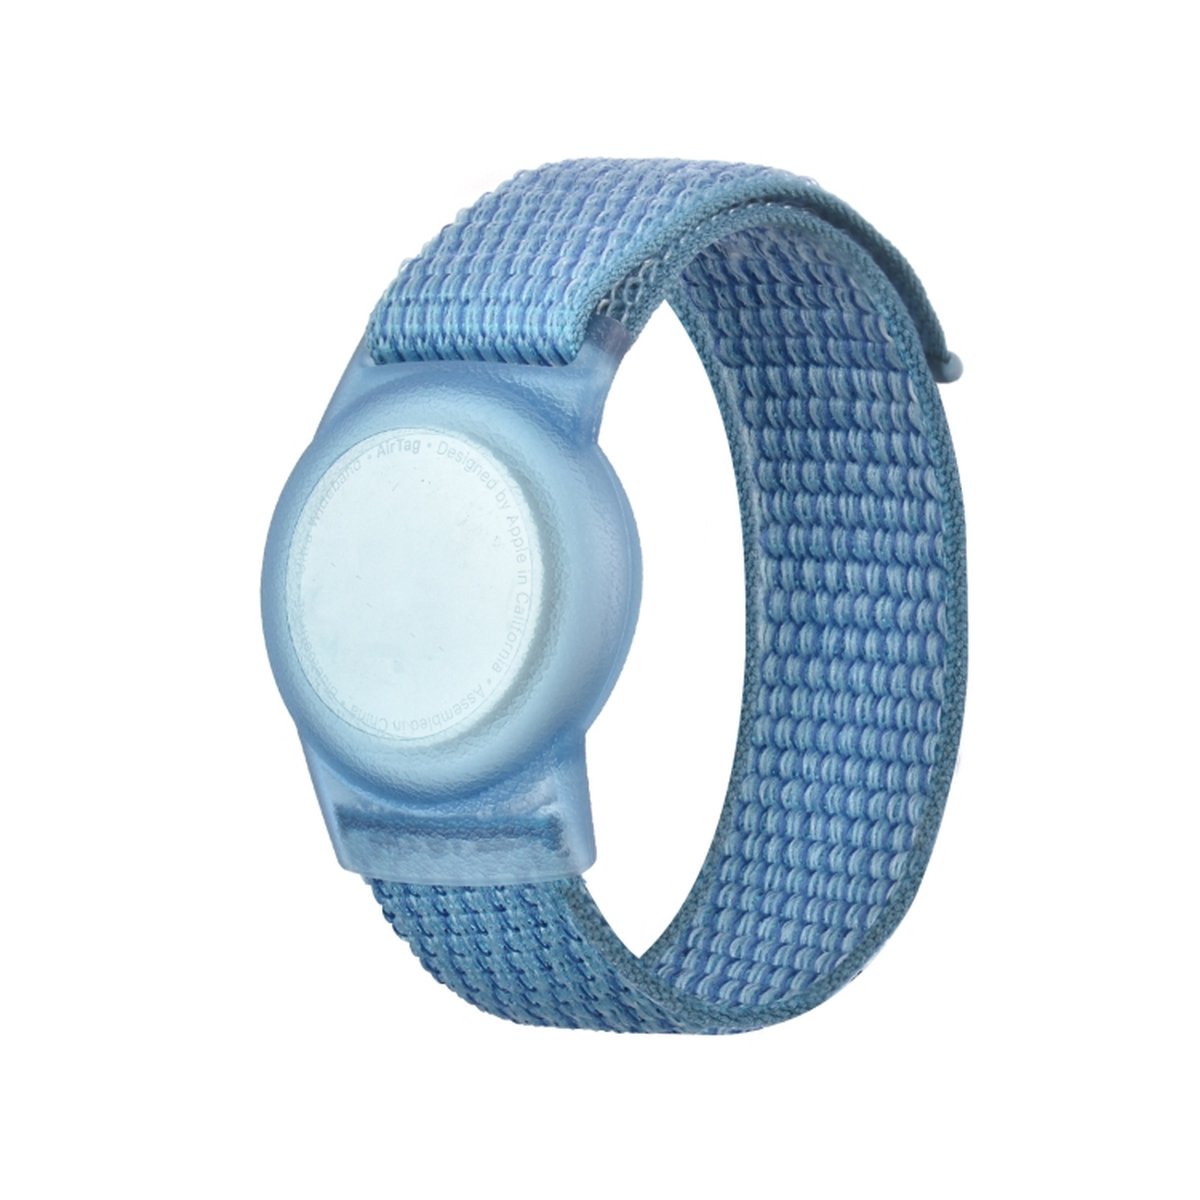 Airtag armband Polsband horloge - 17 CM - Airtag Sleutelhanger - Airtag Polsband Voor Kinderen - Airtag Armband - Airtag Apple - Klittenband - Airtag Houder - Airtag Hoesje - blauw